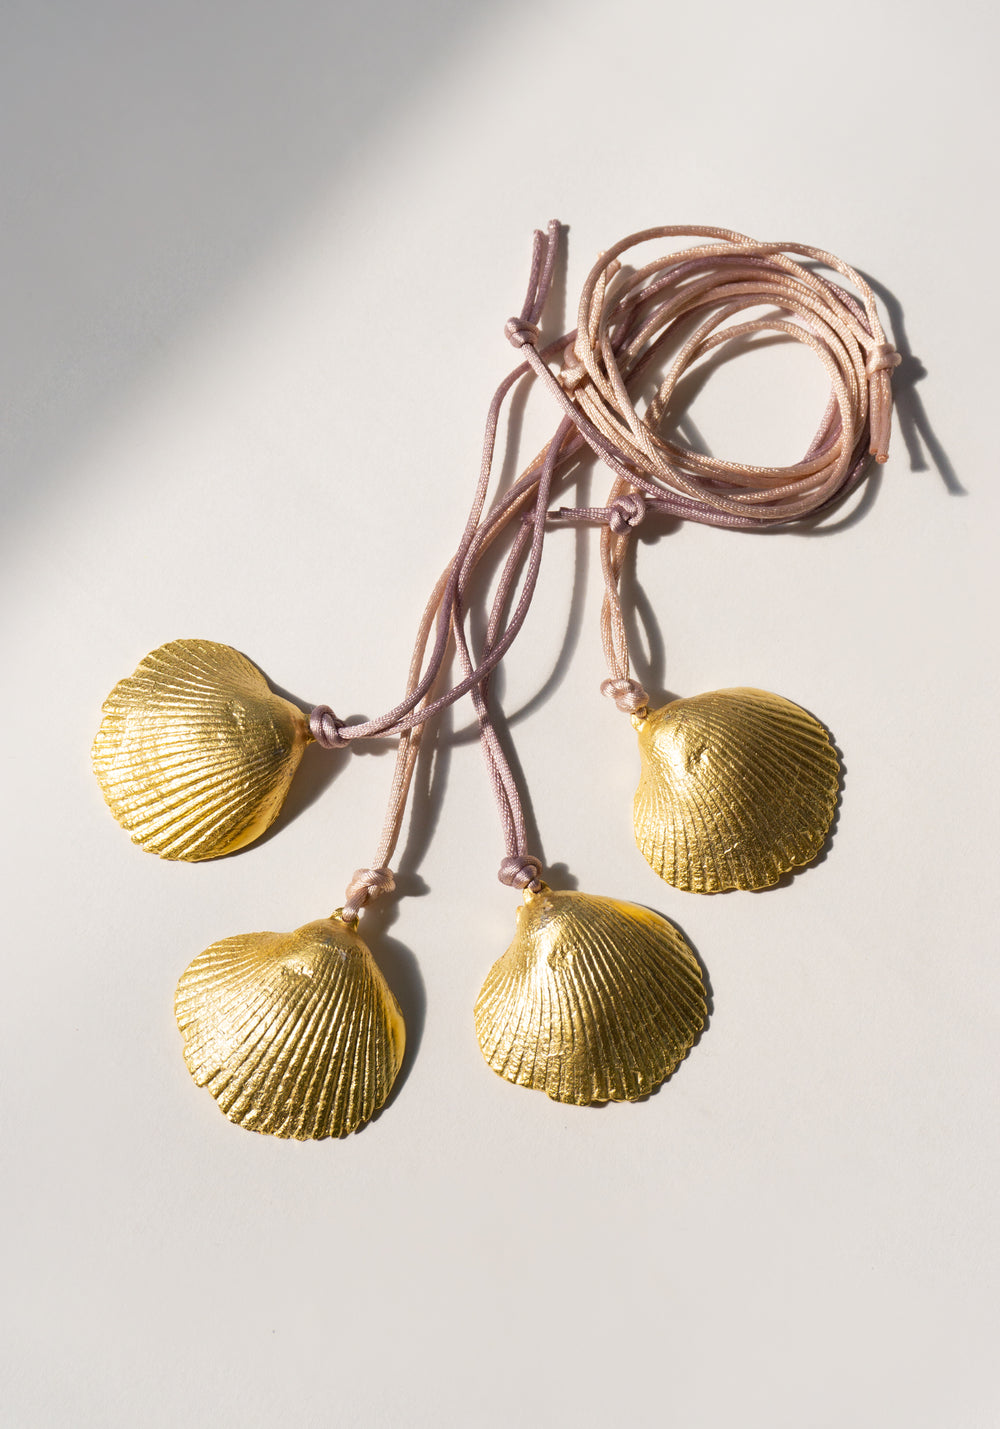 Ionian Shell Necklace